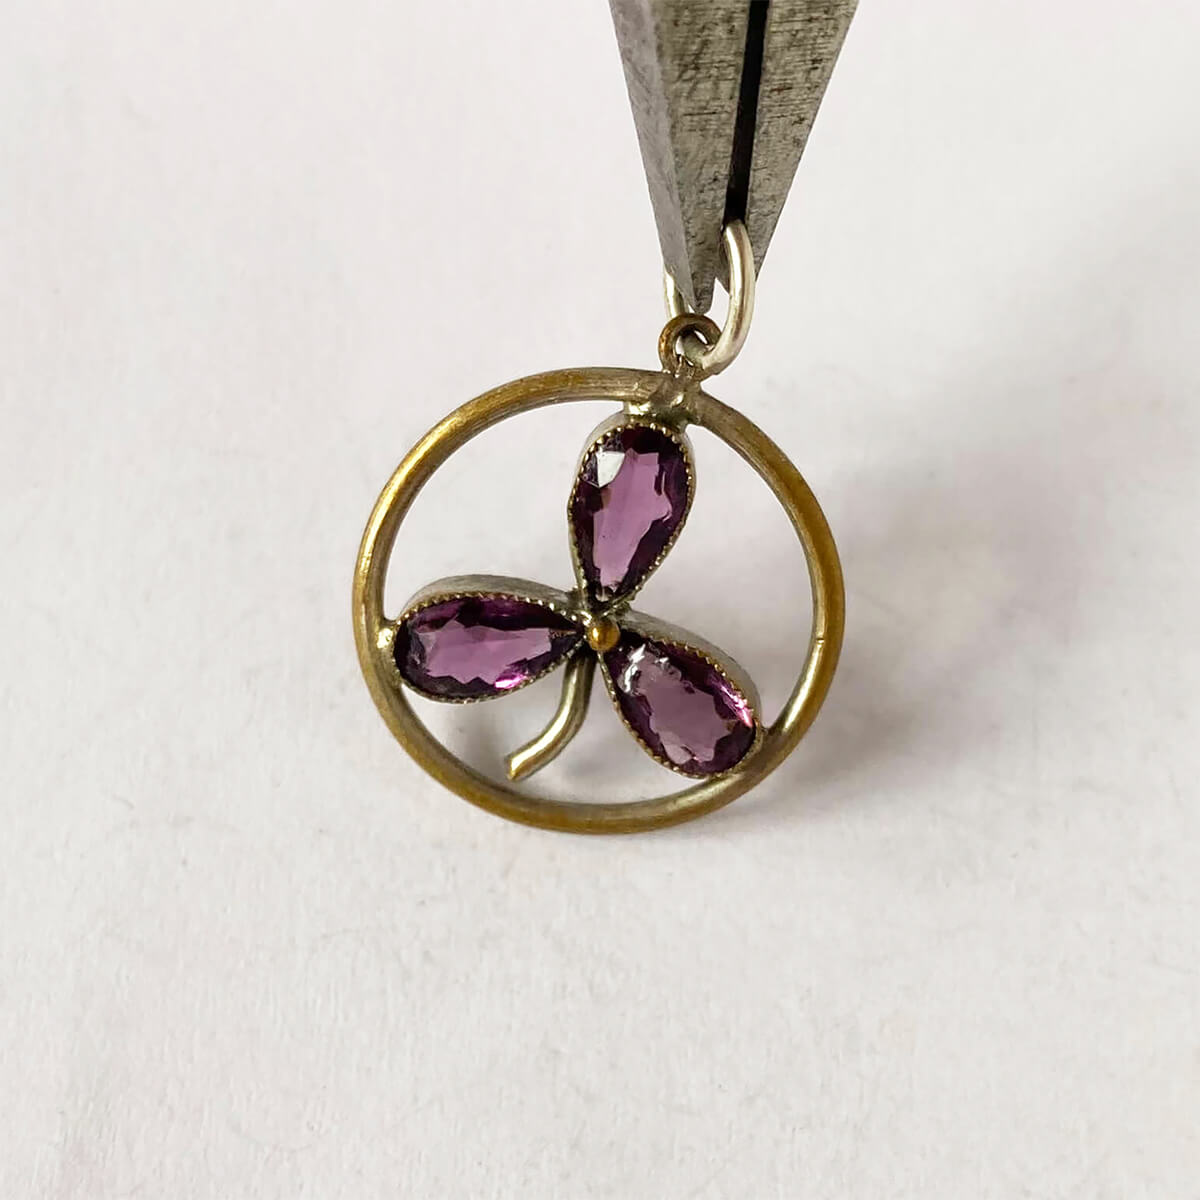 Antique French purple amethyst clover leaf charm gilded silver pendant from Charmarama